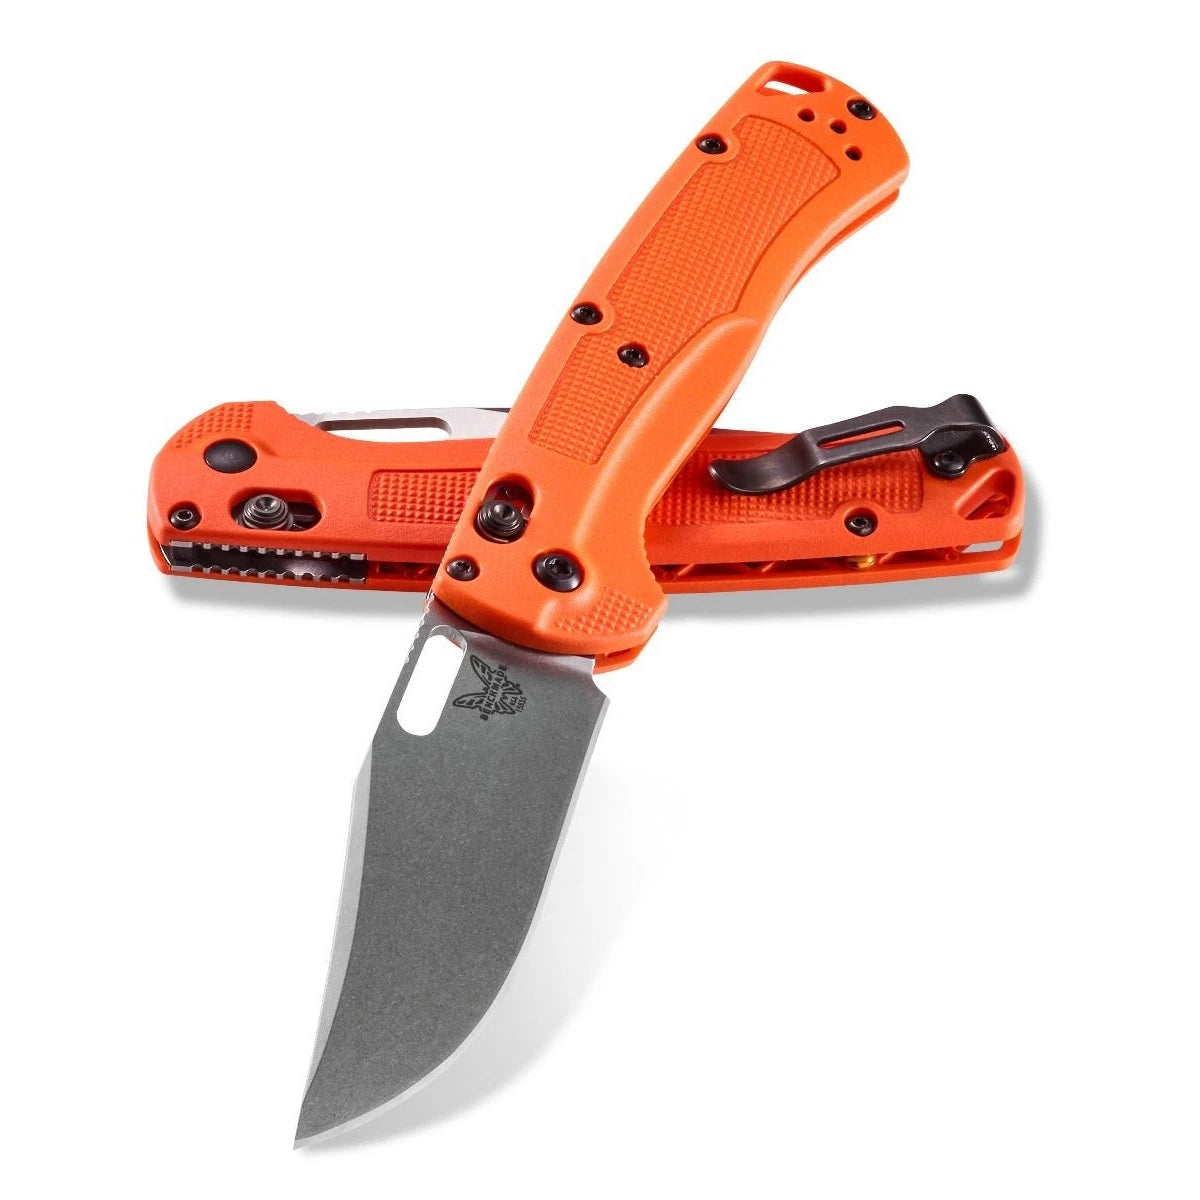 Benchmade | Taggedout Lightweight Hunting and Bugout Knife